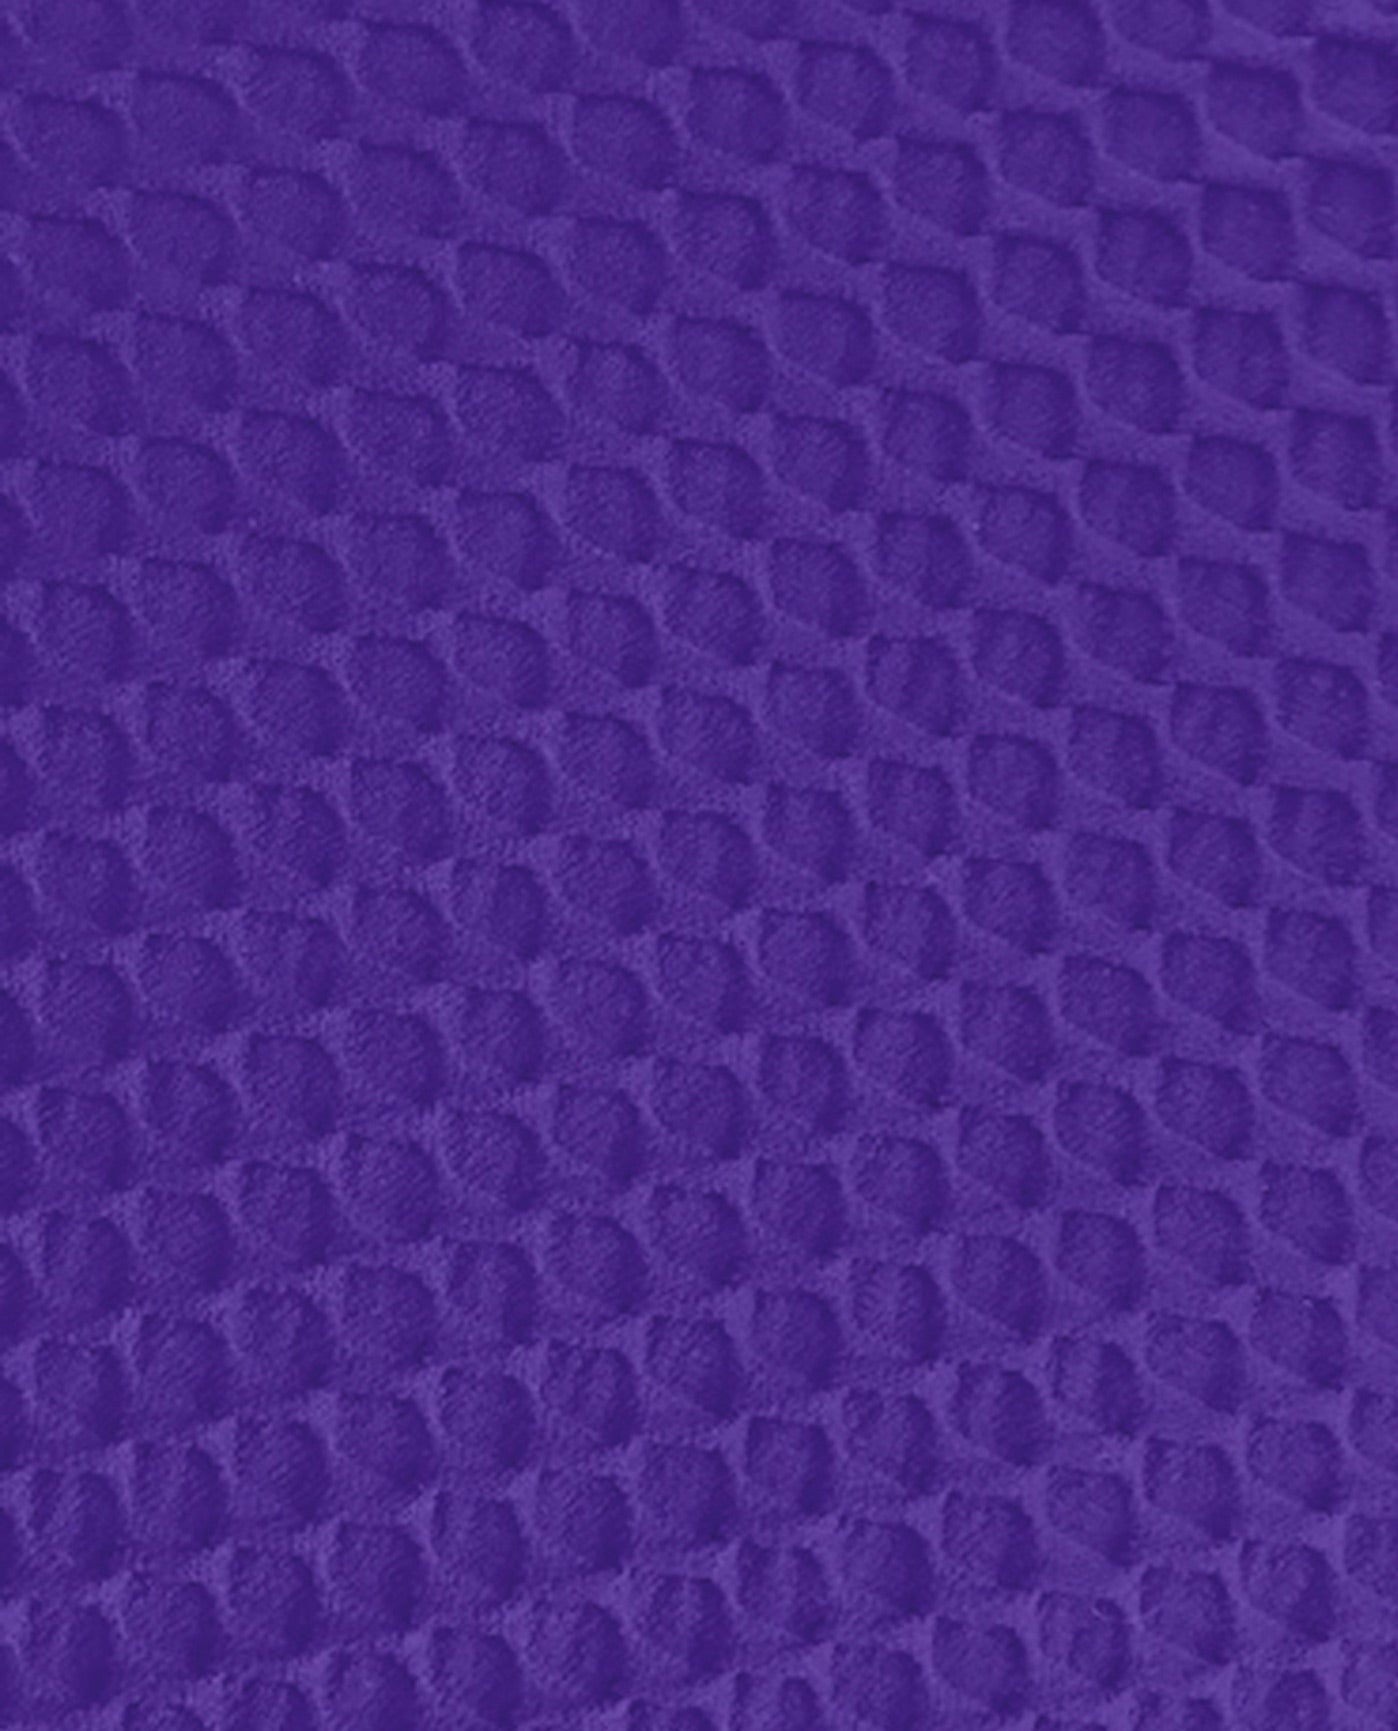 FABRIC SWATCH VIEW OF CHLORINE RESISTANT AQUAMORE SOLID TEXTURED CROSS BACK PLUS SIZE SWIMSUIT | 510L AQT TEXTURED PURPLE